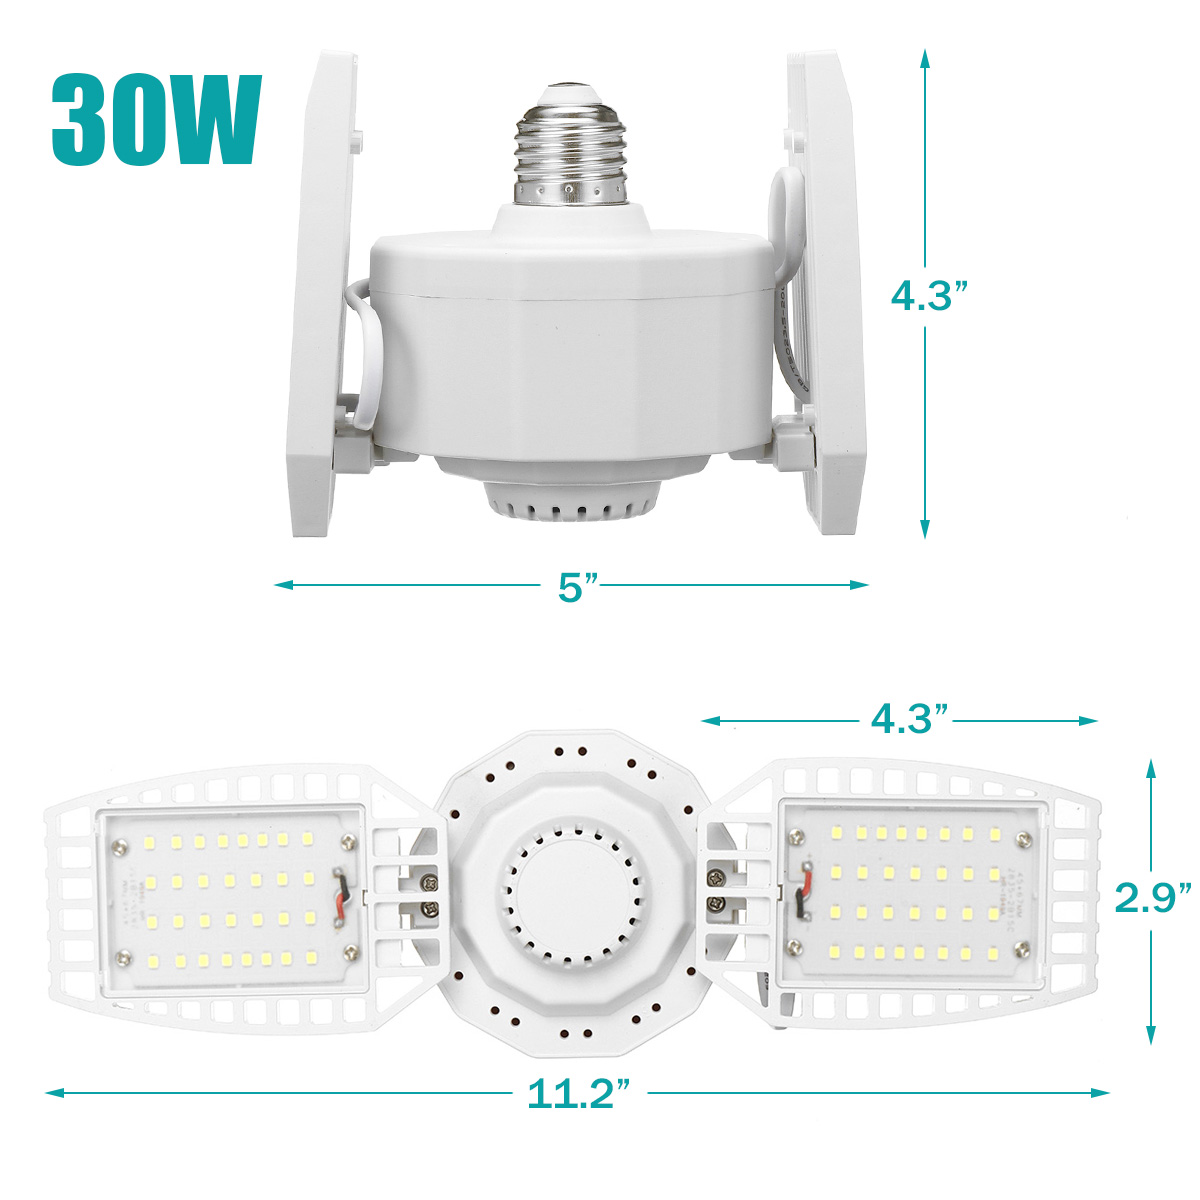 LED-Camping-Light-Adjustable-Folding-Ceiling-Fan-Blade-Lamp-Energy-Saving-Work-Lamp-Outdoor-Home-1836849-2